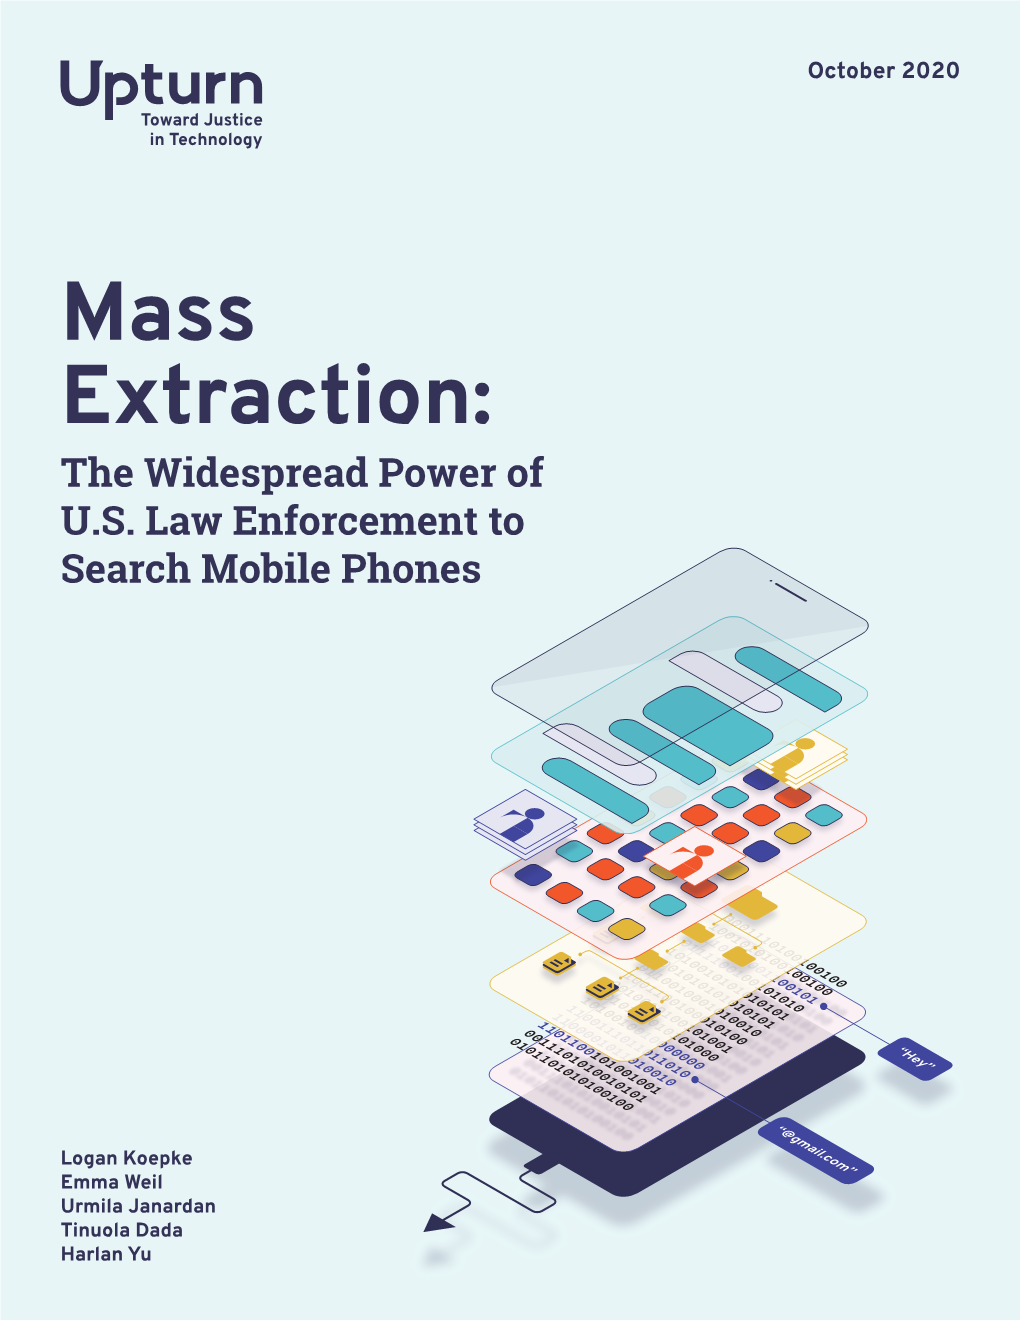 Mass Extraction: the Widespread Power of U.S